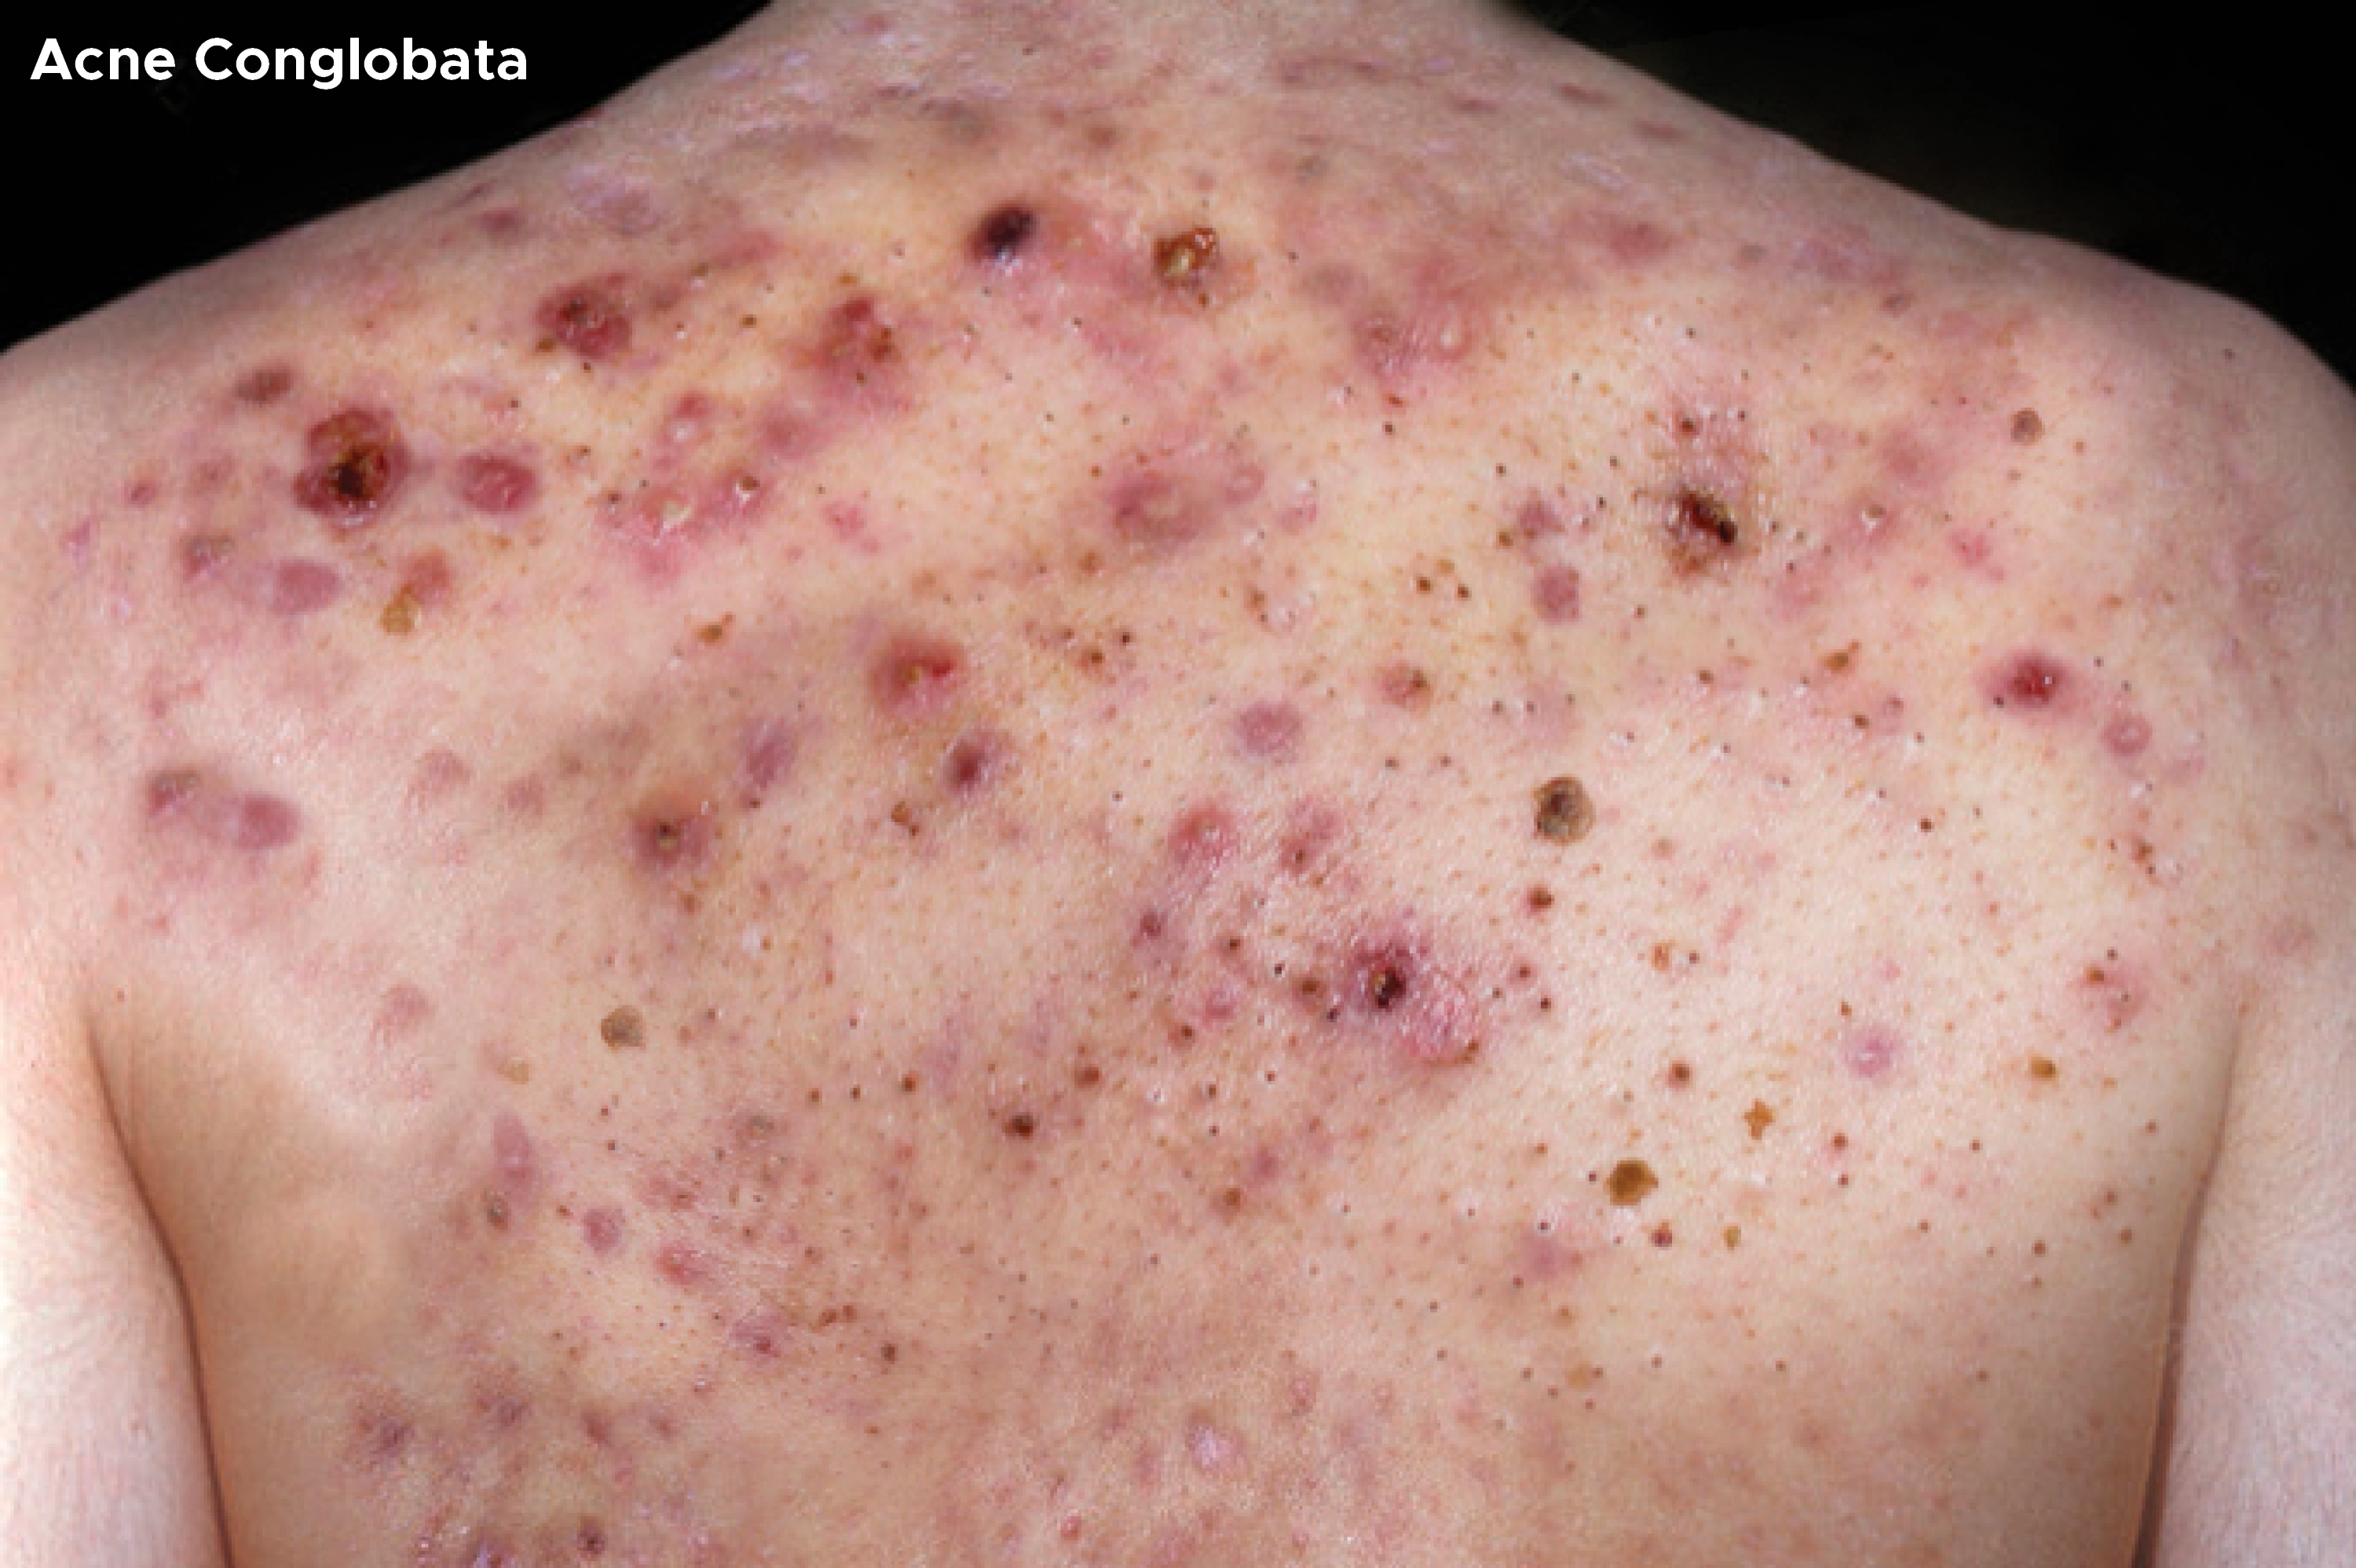 Acne Conglobata on back and shoulders. 